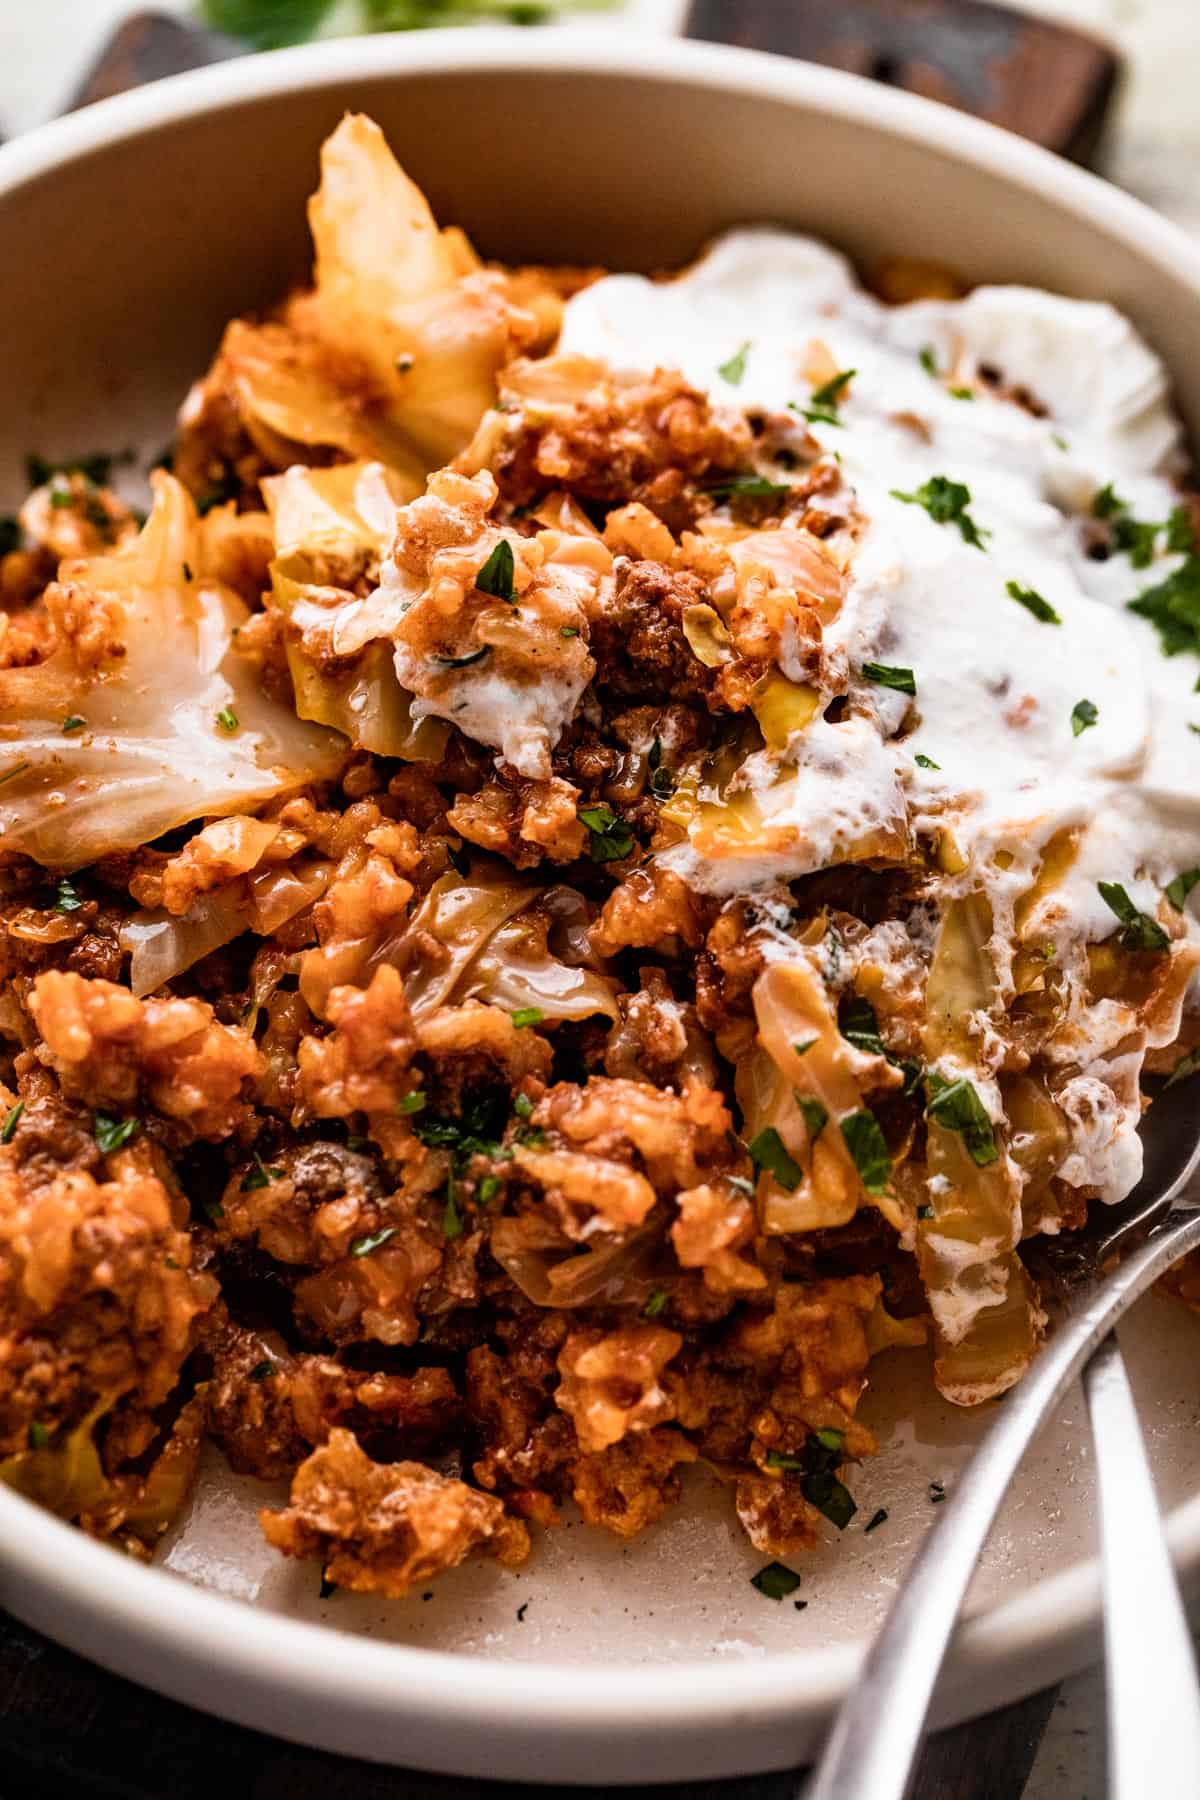 Cabbage Roll Casserole served in a bowl, topped with sour cream, and two utensils placed inside the bowl.